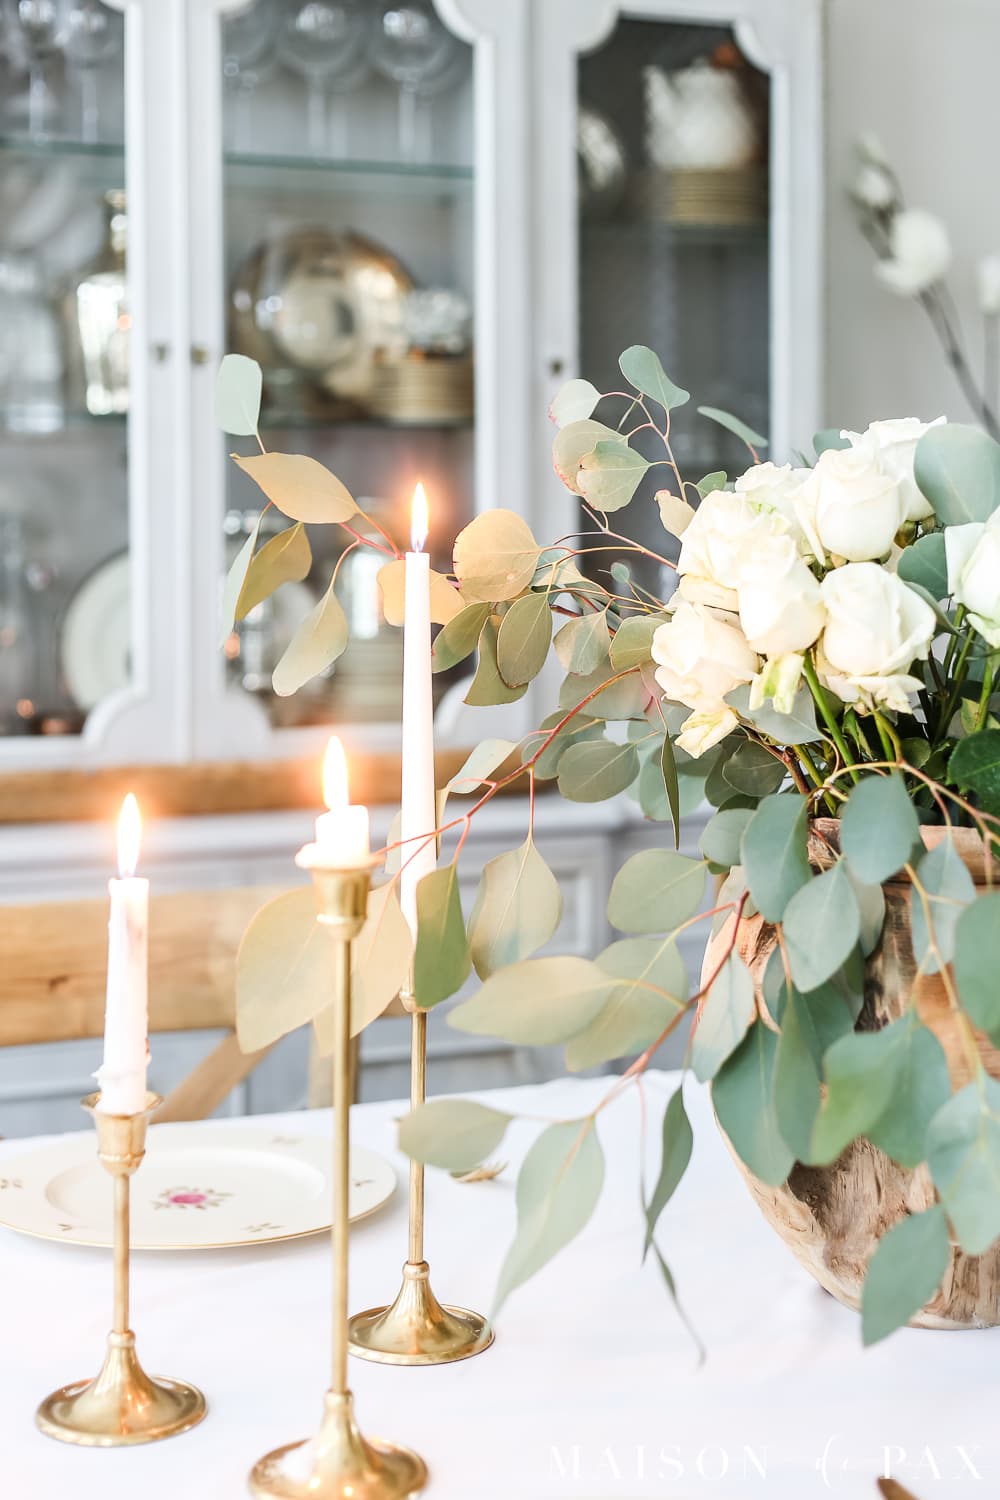 lovely brass candlesticks with white roses and eucalyptus centerpiece- Maison de Pax